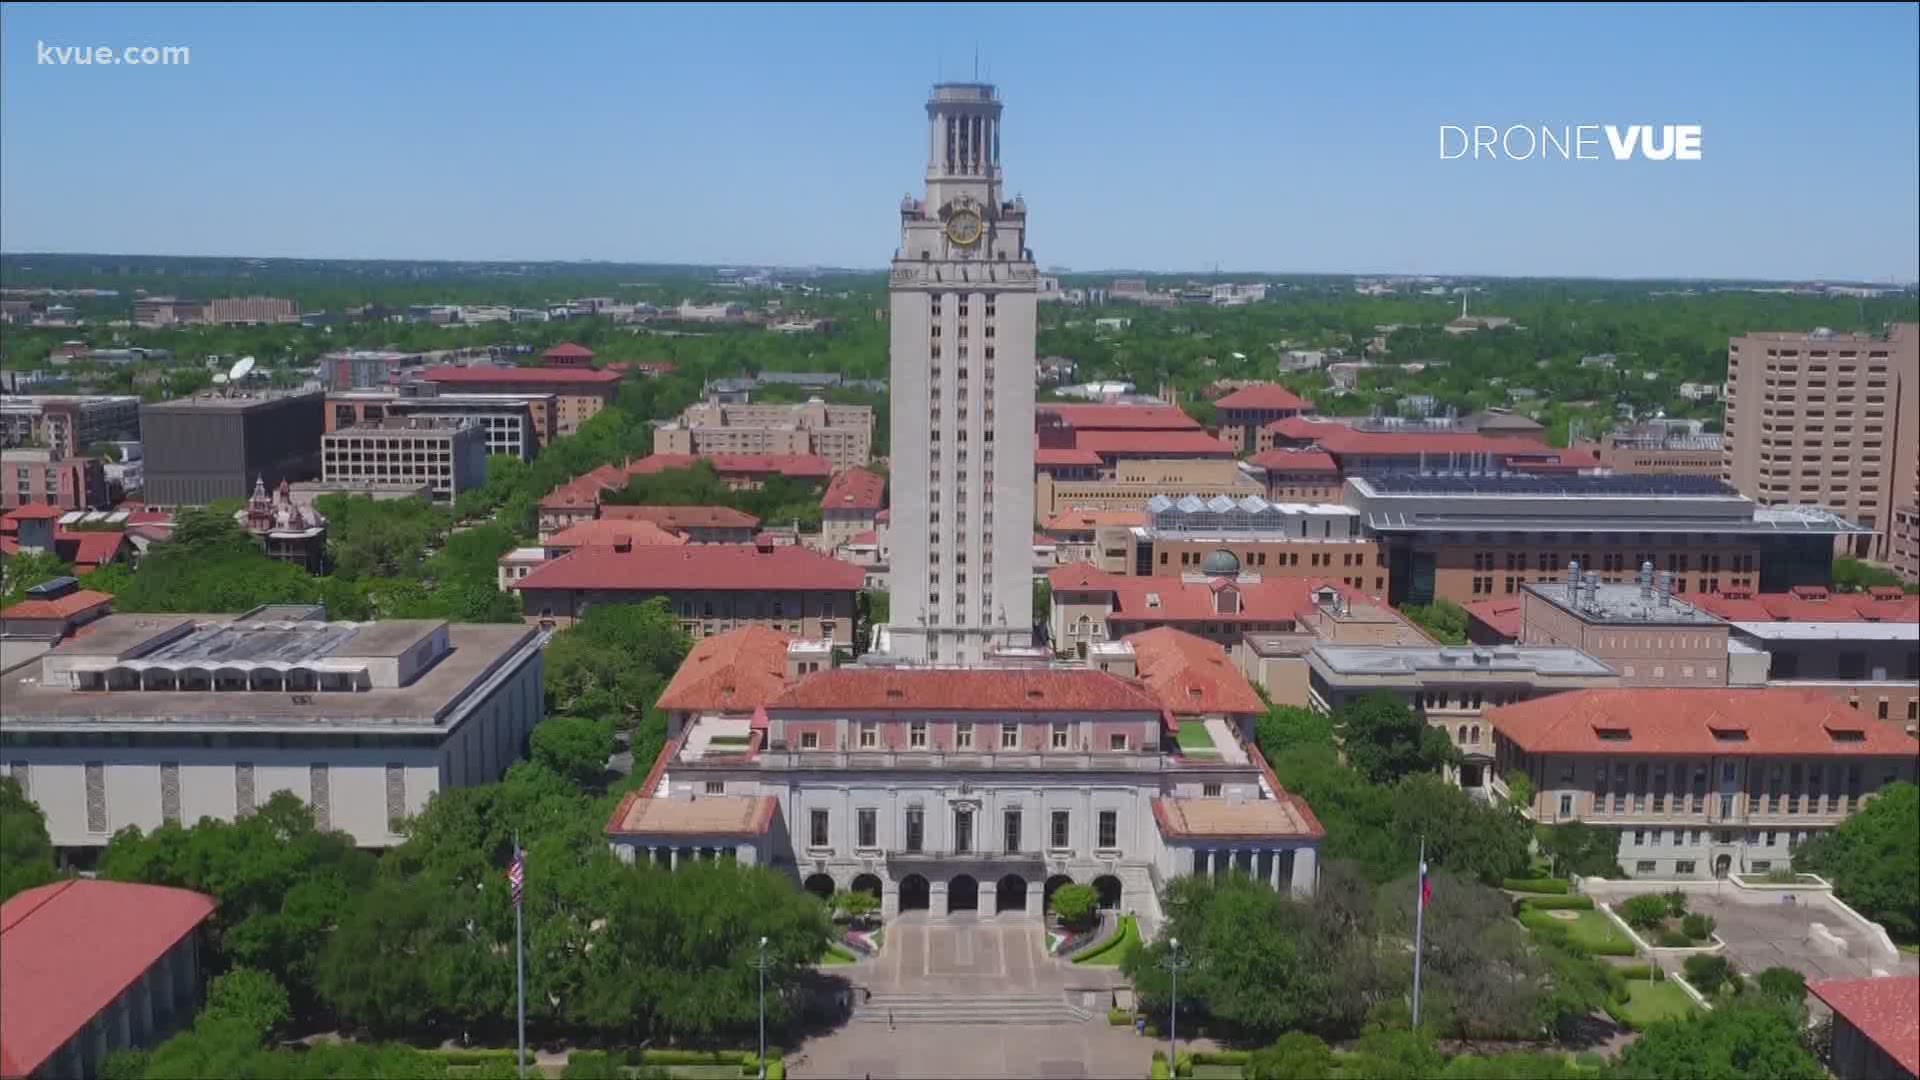 The University of Texas at Austin released its fall semester plans today. But the school said those plans could change if COVID-19 worsens closer to the school year.